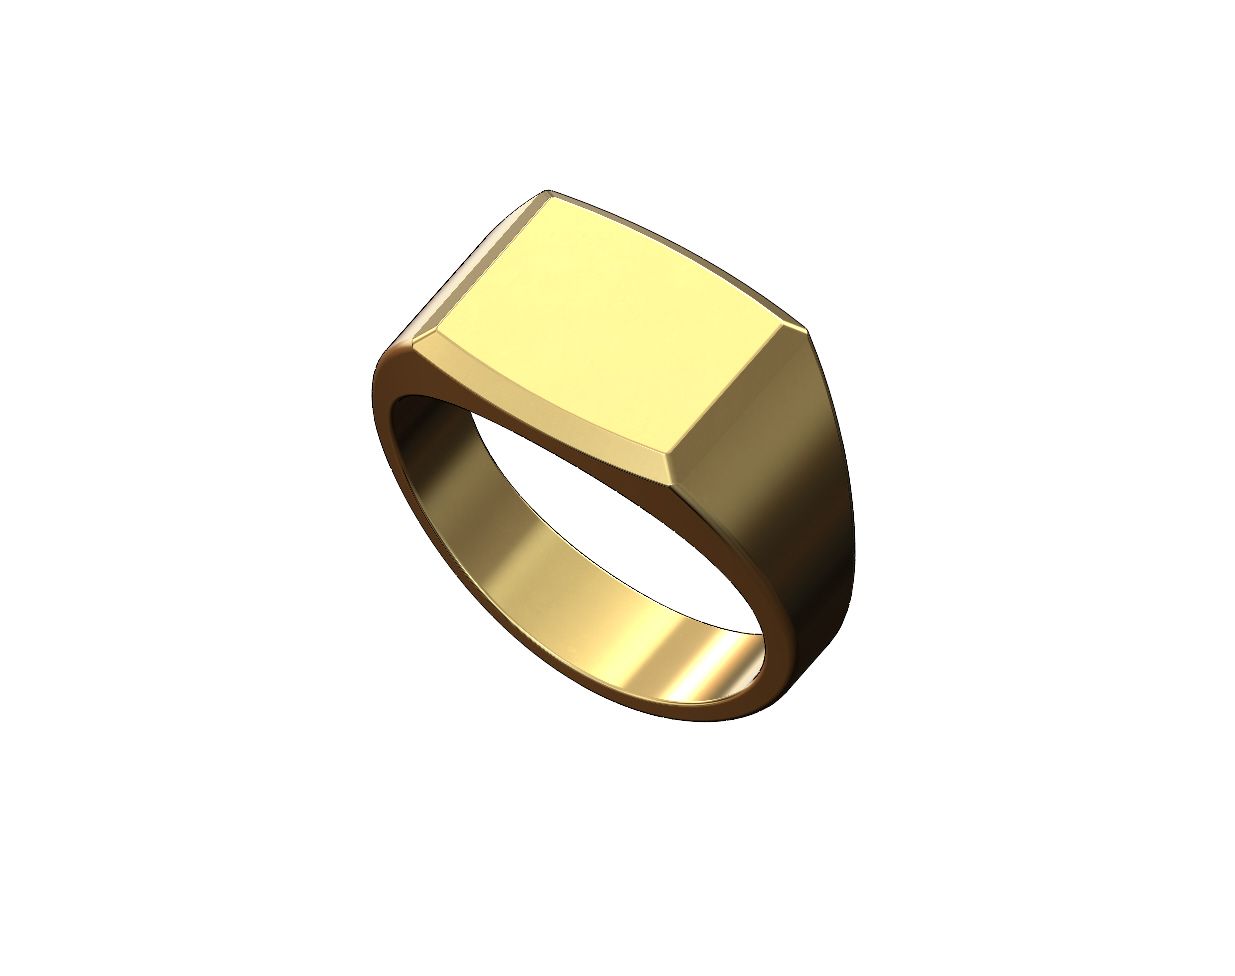 Chamfred-rounded-recta-signet-ring-size5to11-01.jpg Download 3MF file Chamfred Rounded rectangular signet ring US sizes 5to11 3D print model • 3D print template, RachidSW